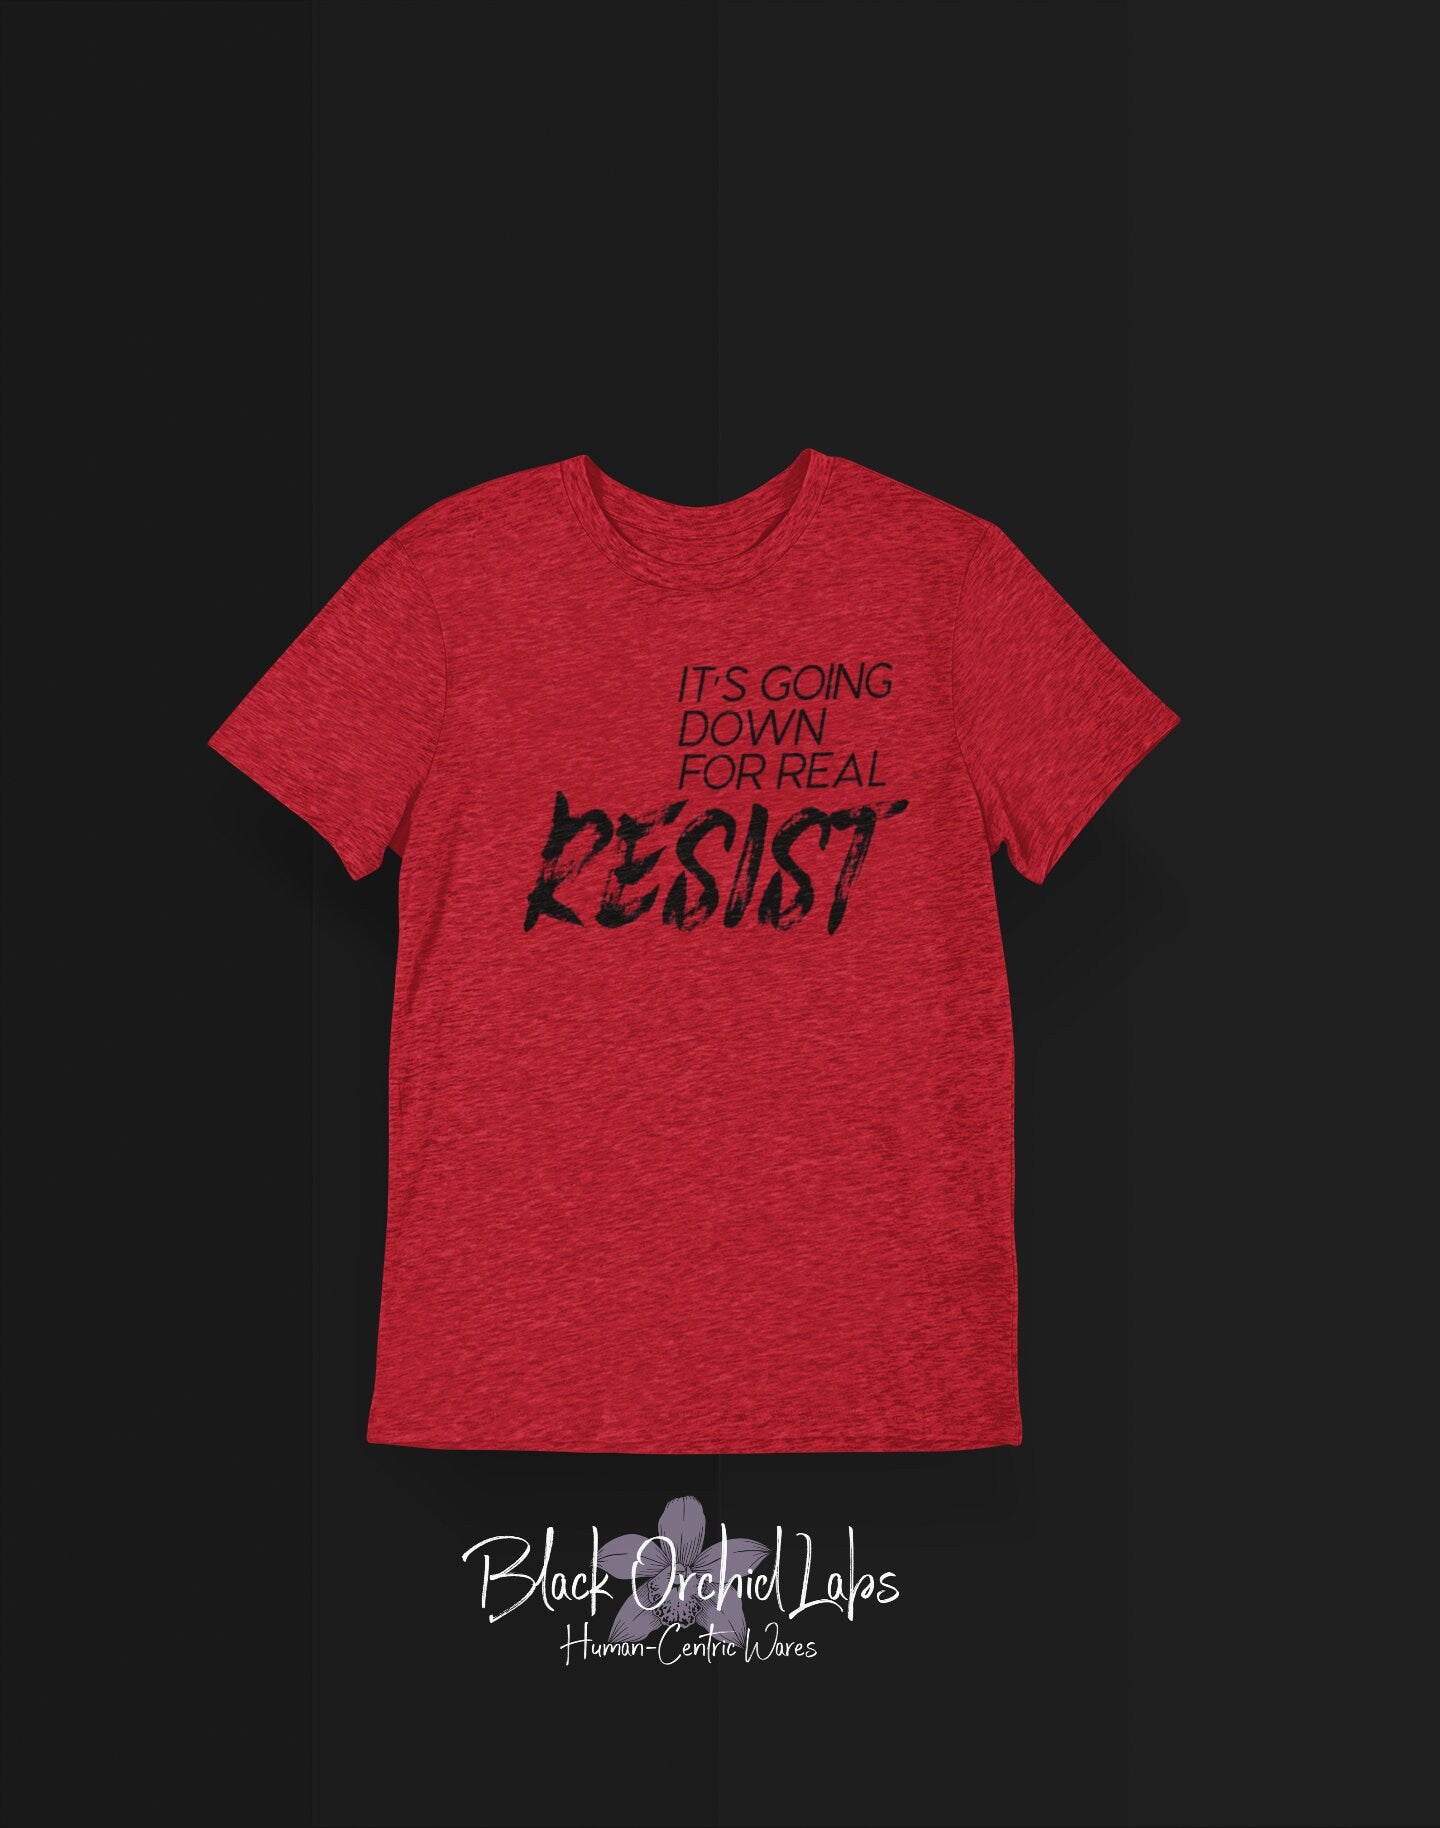 Resist Hoodie, T Shirt, Womens Rights Shirt, Pro Roe, Abortion Rights Support, Bella Canvas Ultra Premium, Protest, Reproductive Health